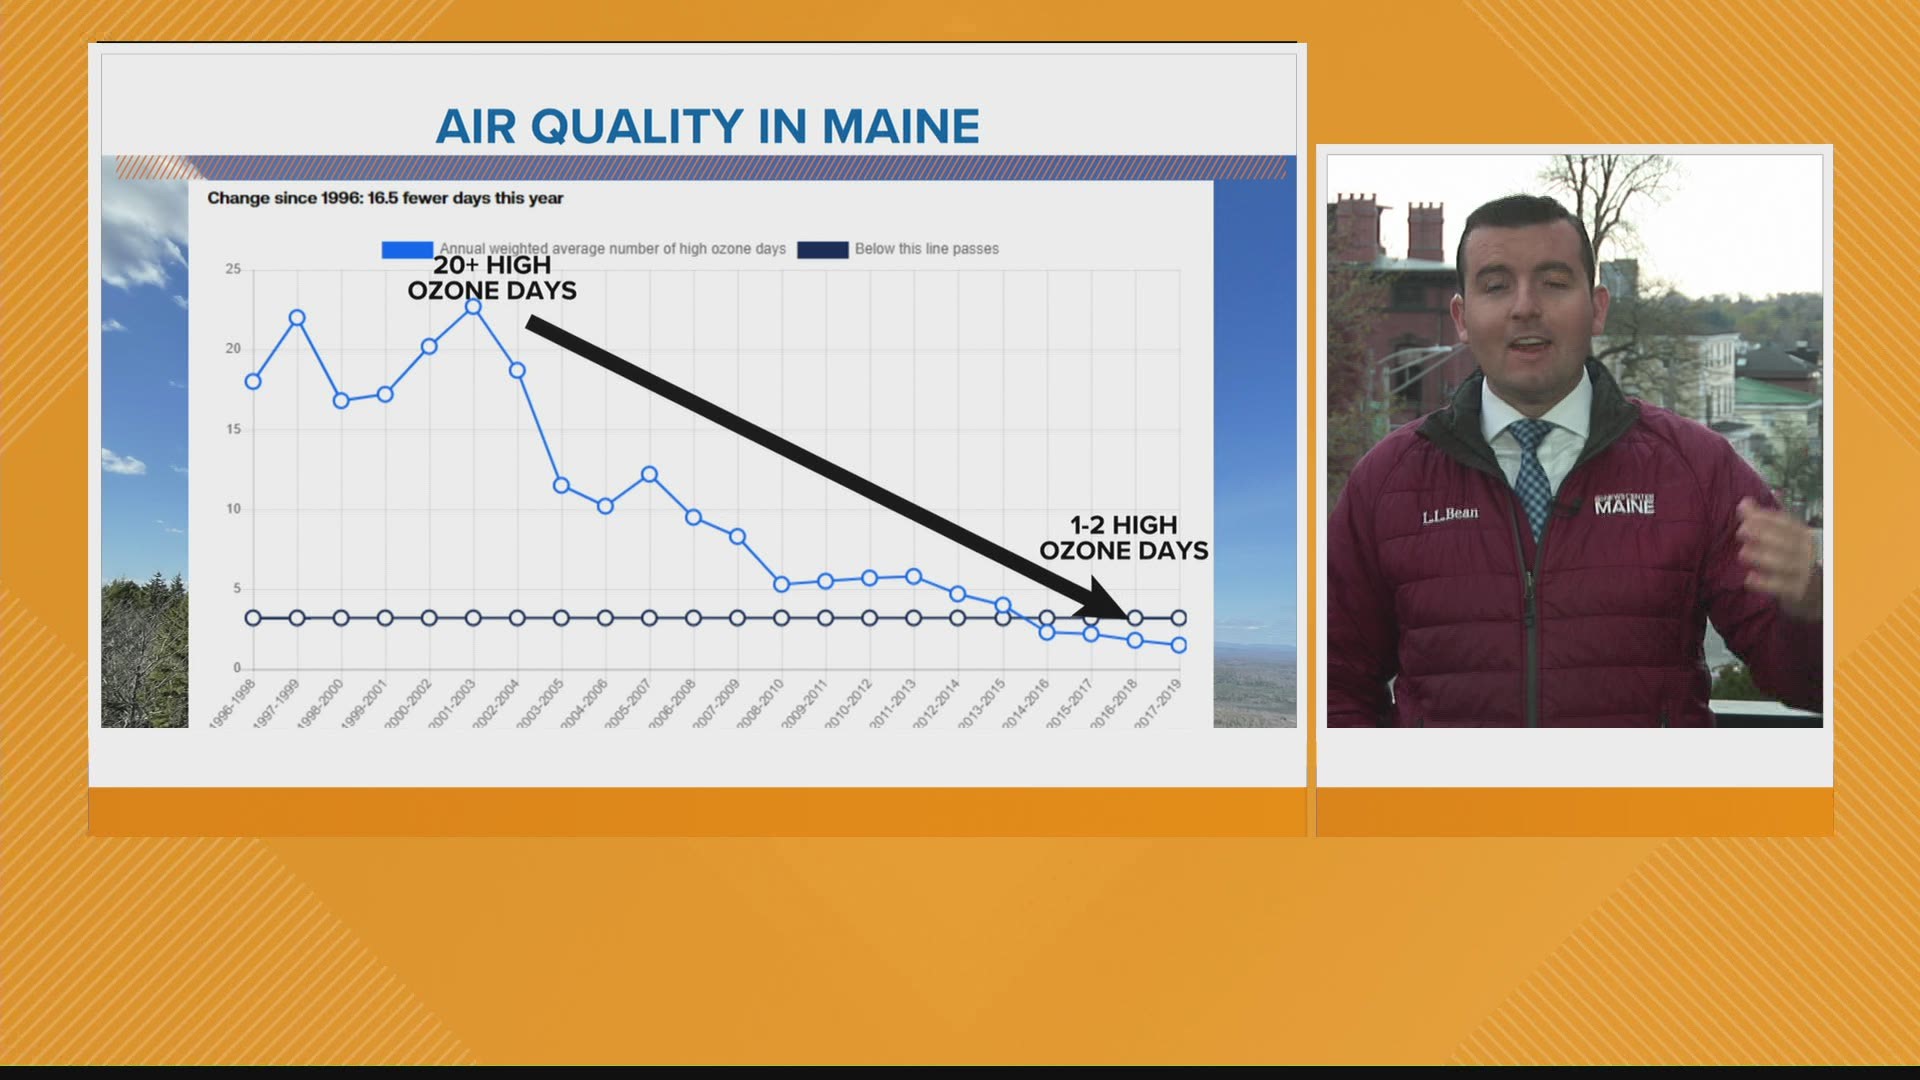 The American Lung Associations' annual report grading air quality is out, and the grades are quite good for Maine.